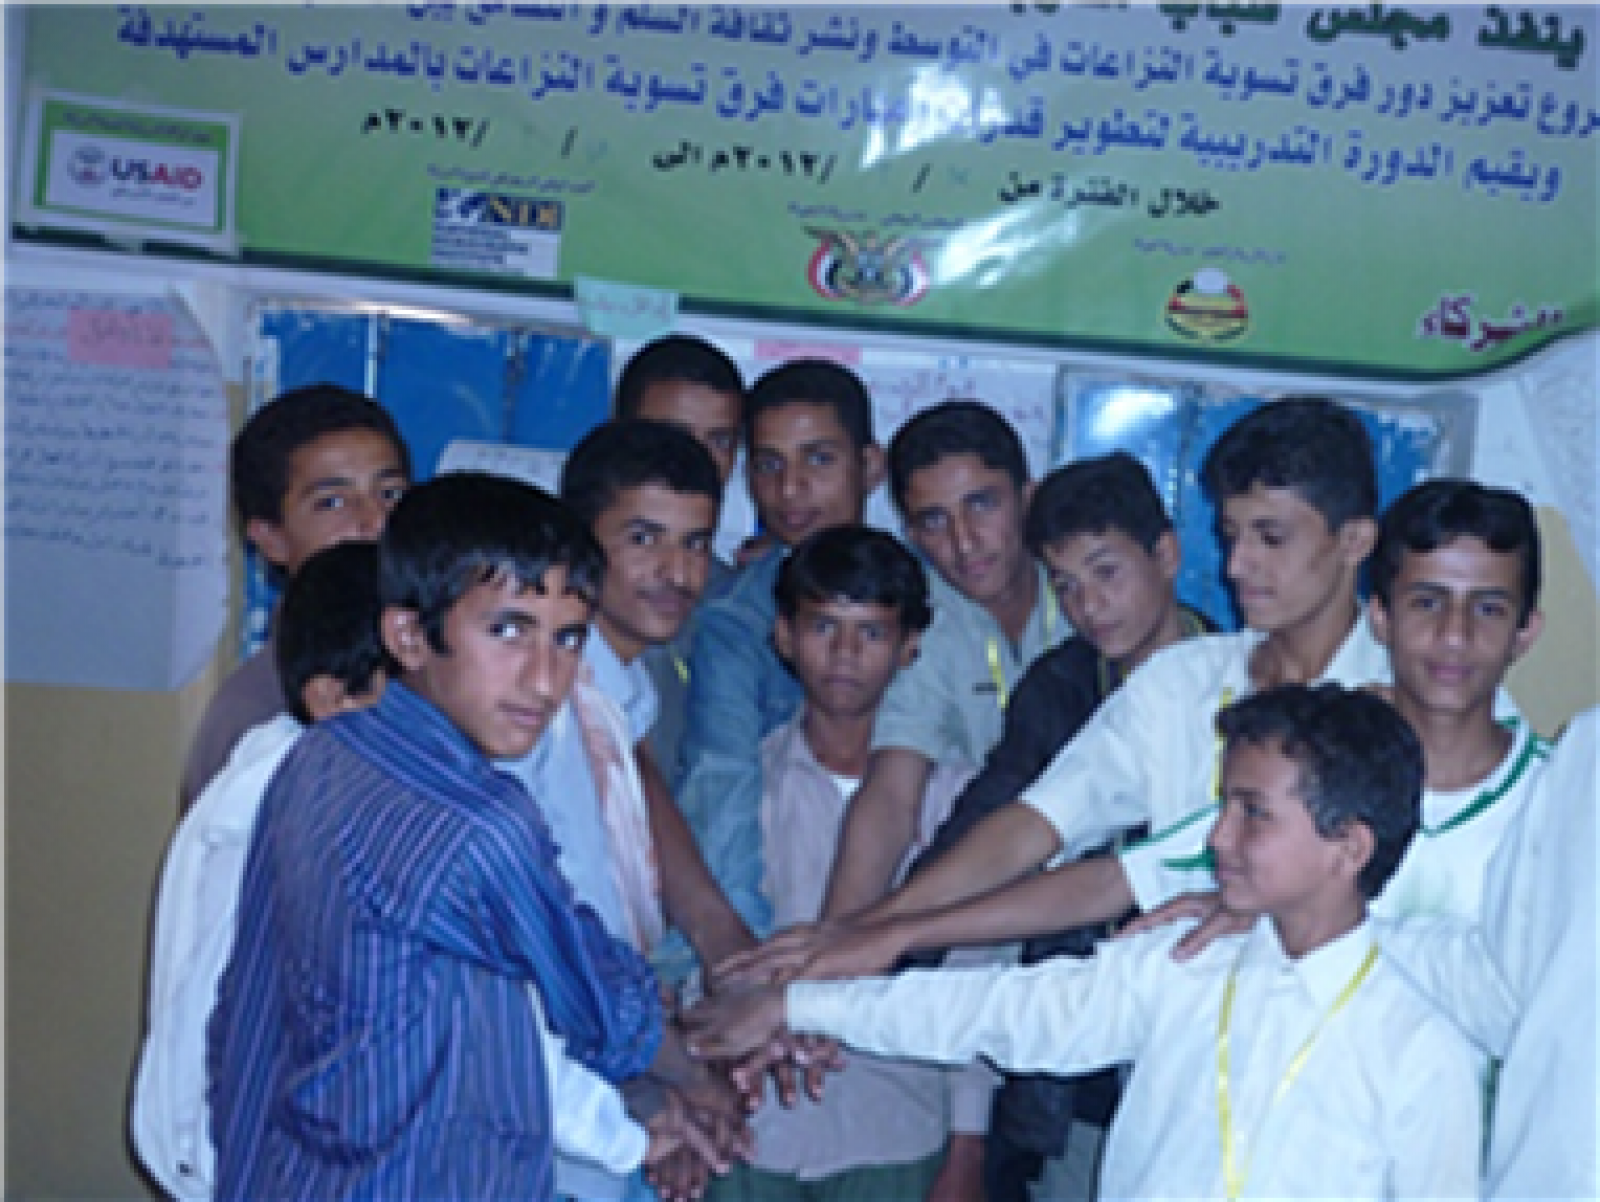 Youth Conflict Resolution Program Yields Results in Yemen